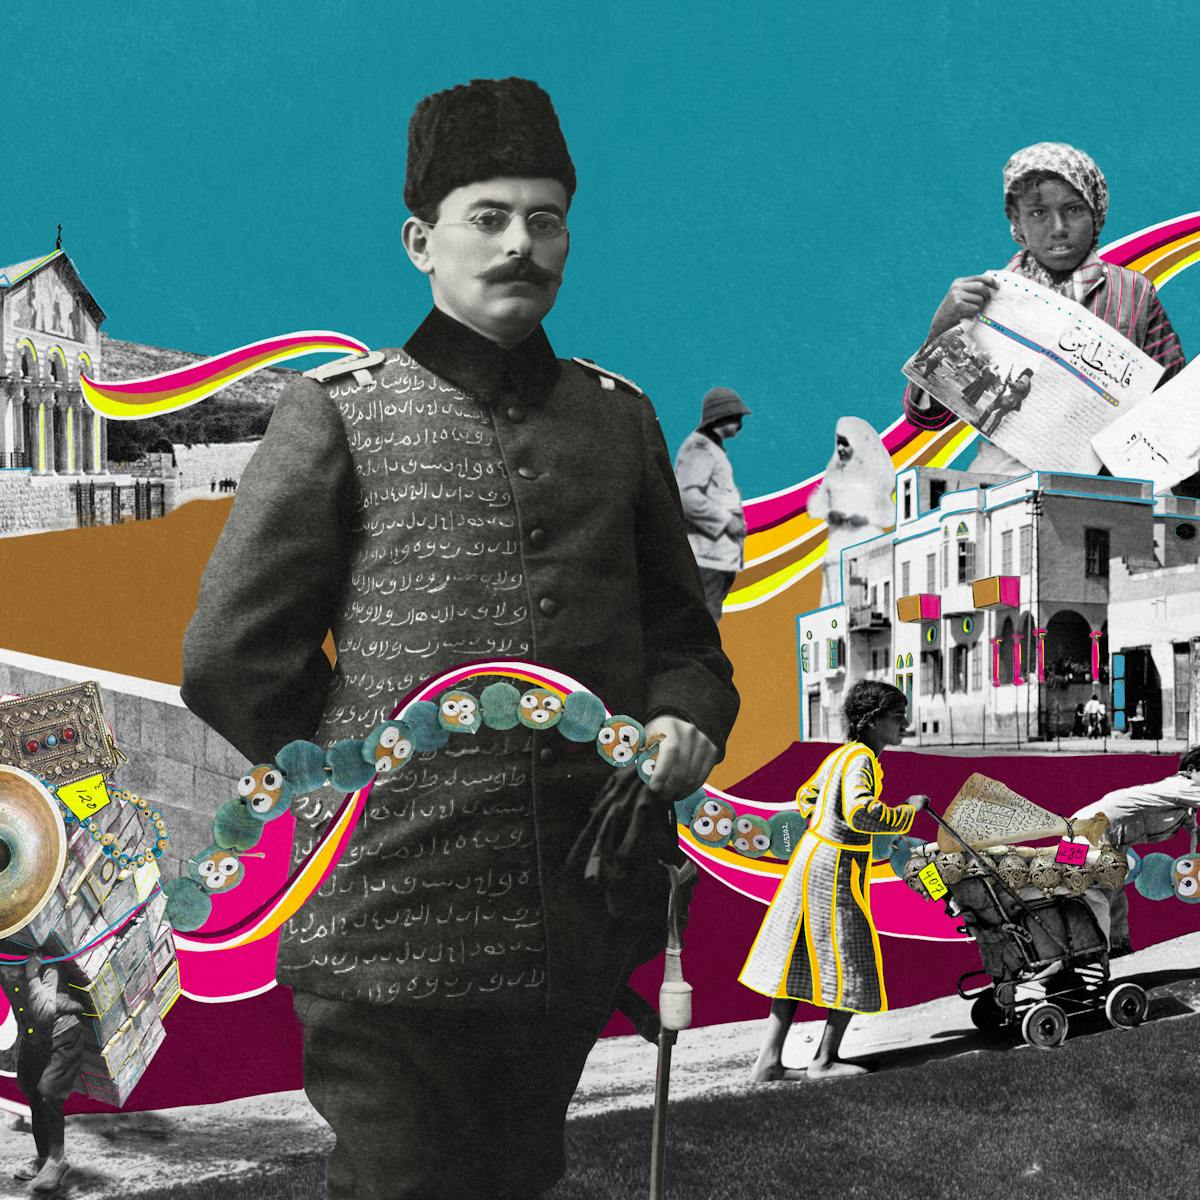 Digital collaged artwork using black and white archive imagery and over-drawn colourful graphical elements. The artwork shows an archive image of a man with a moustache in military uniform from the early 20th century. This portrait is in the centre of the artwork. He is surrounded by a stone evil eye amulet. Behind him is a blue background. To his left and right are characters set against an urban landscape; a couple of children sat on a wall, a man carrying a large number of boxes, a girl pushing a pram and a figure holding up posters. Swirling around the landscape are ribbons of colour, pinks, crimsons and yellows.